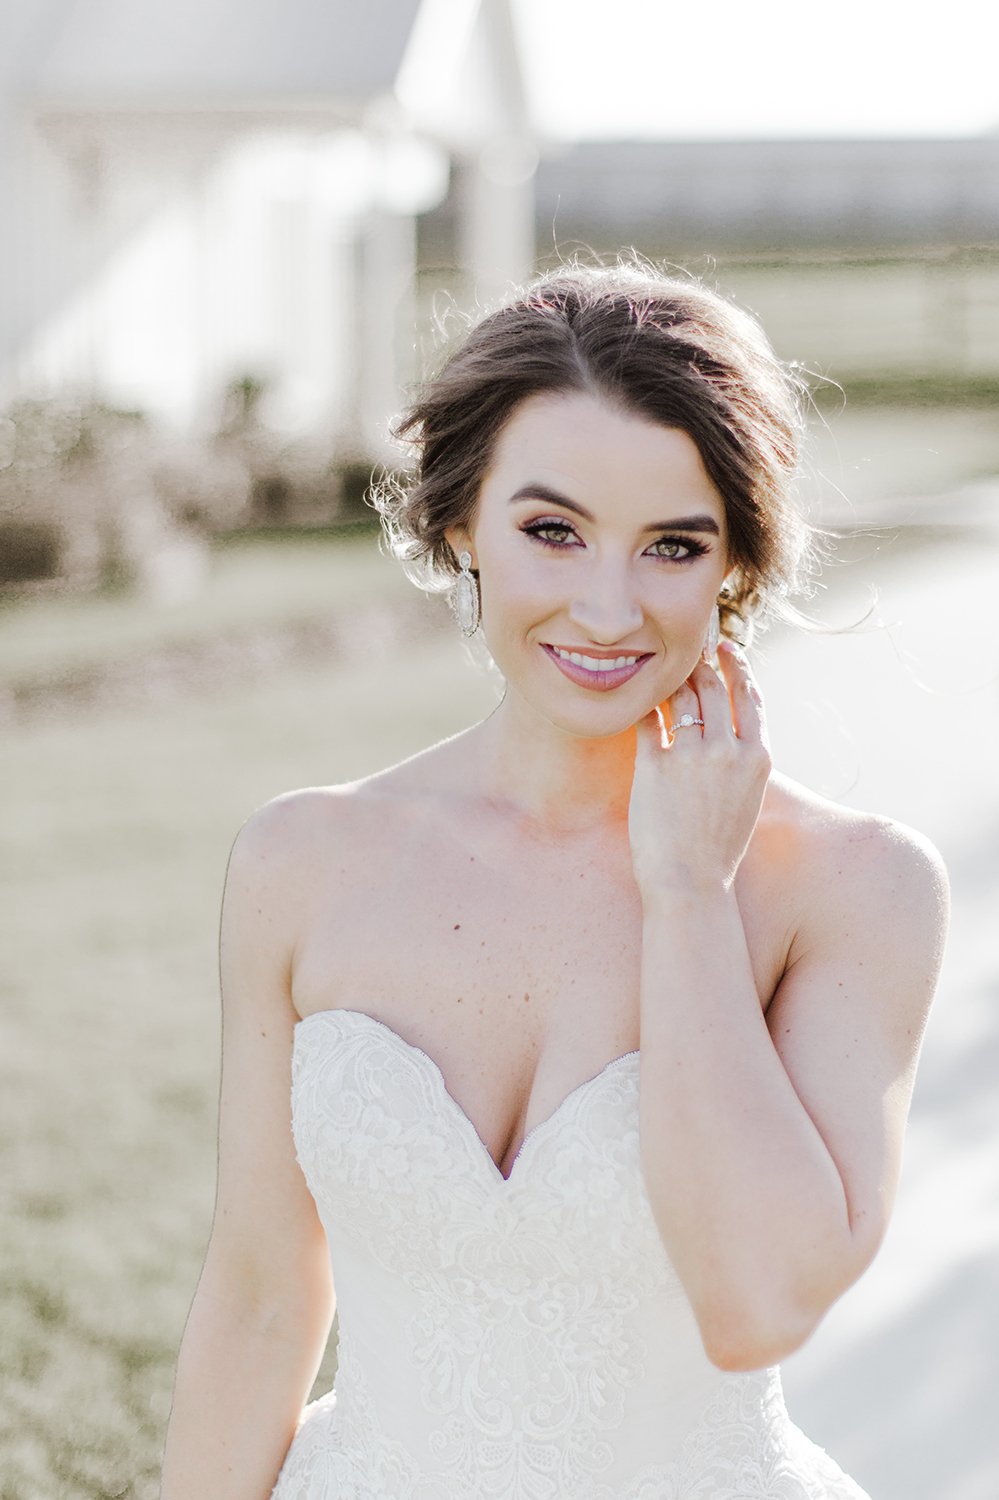 bridal beauty - hair and makeup services in texas